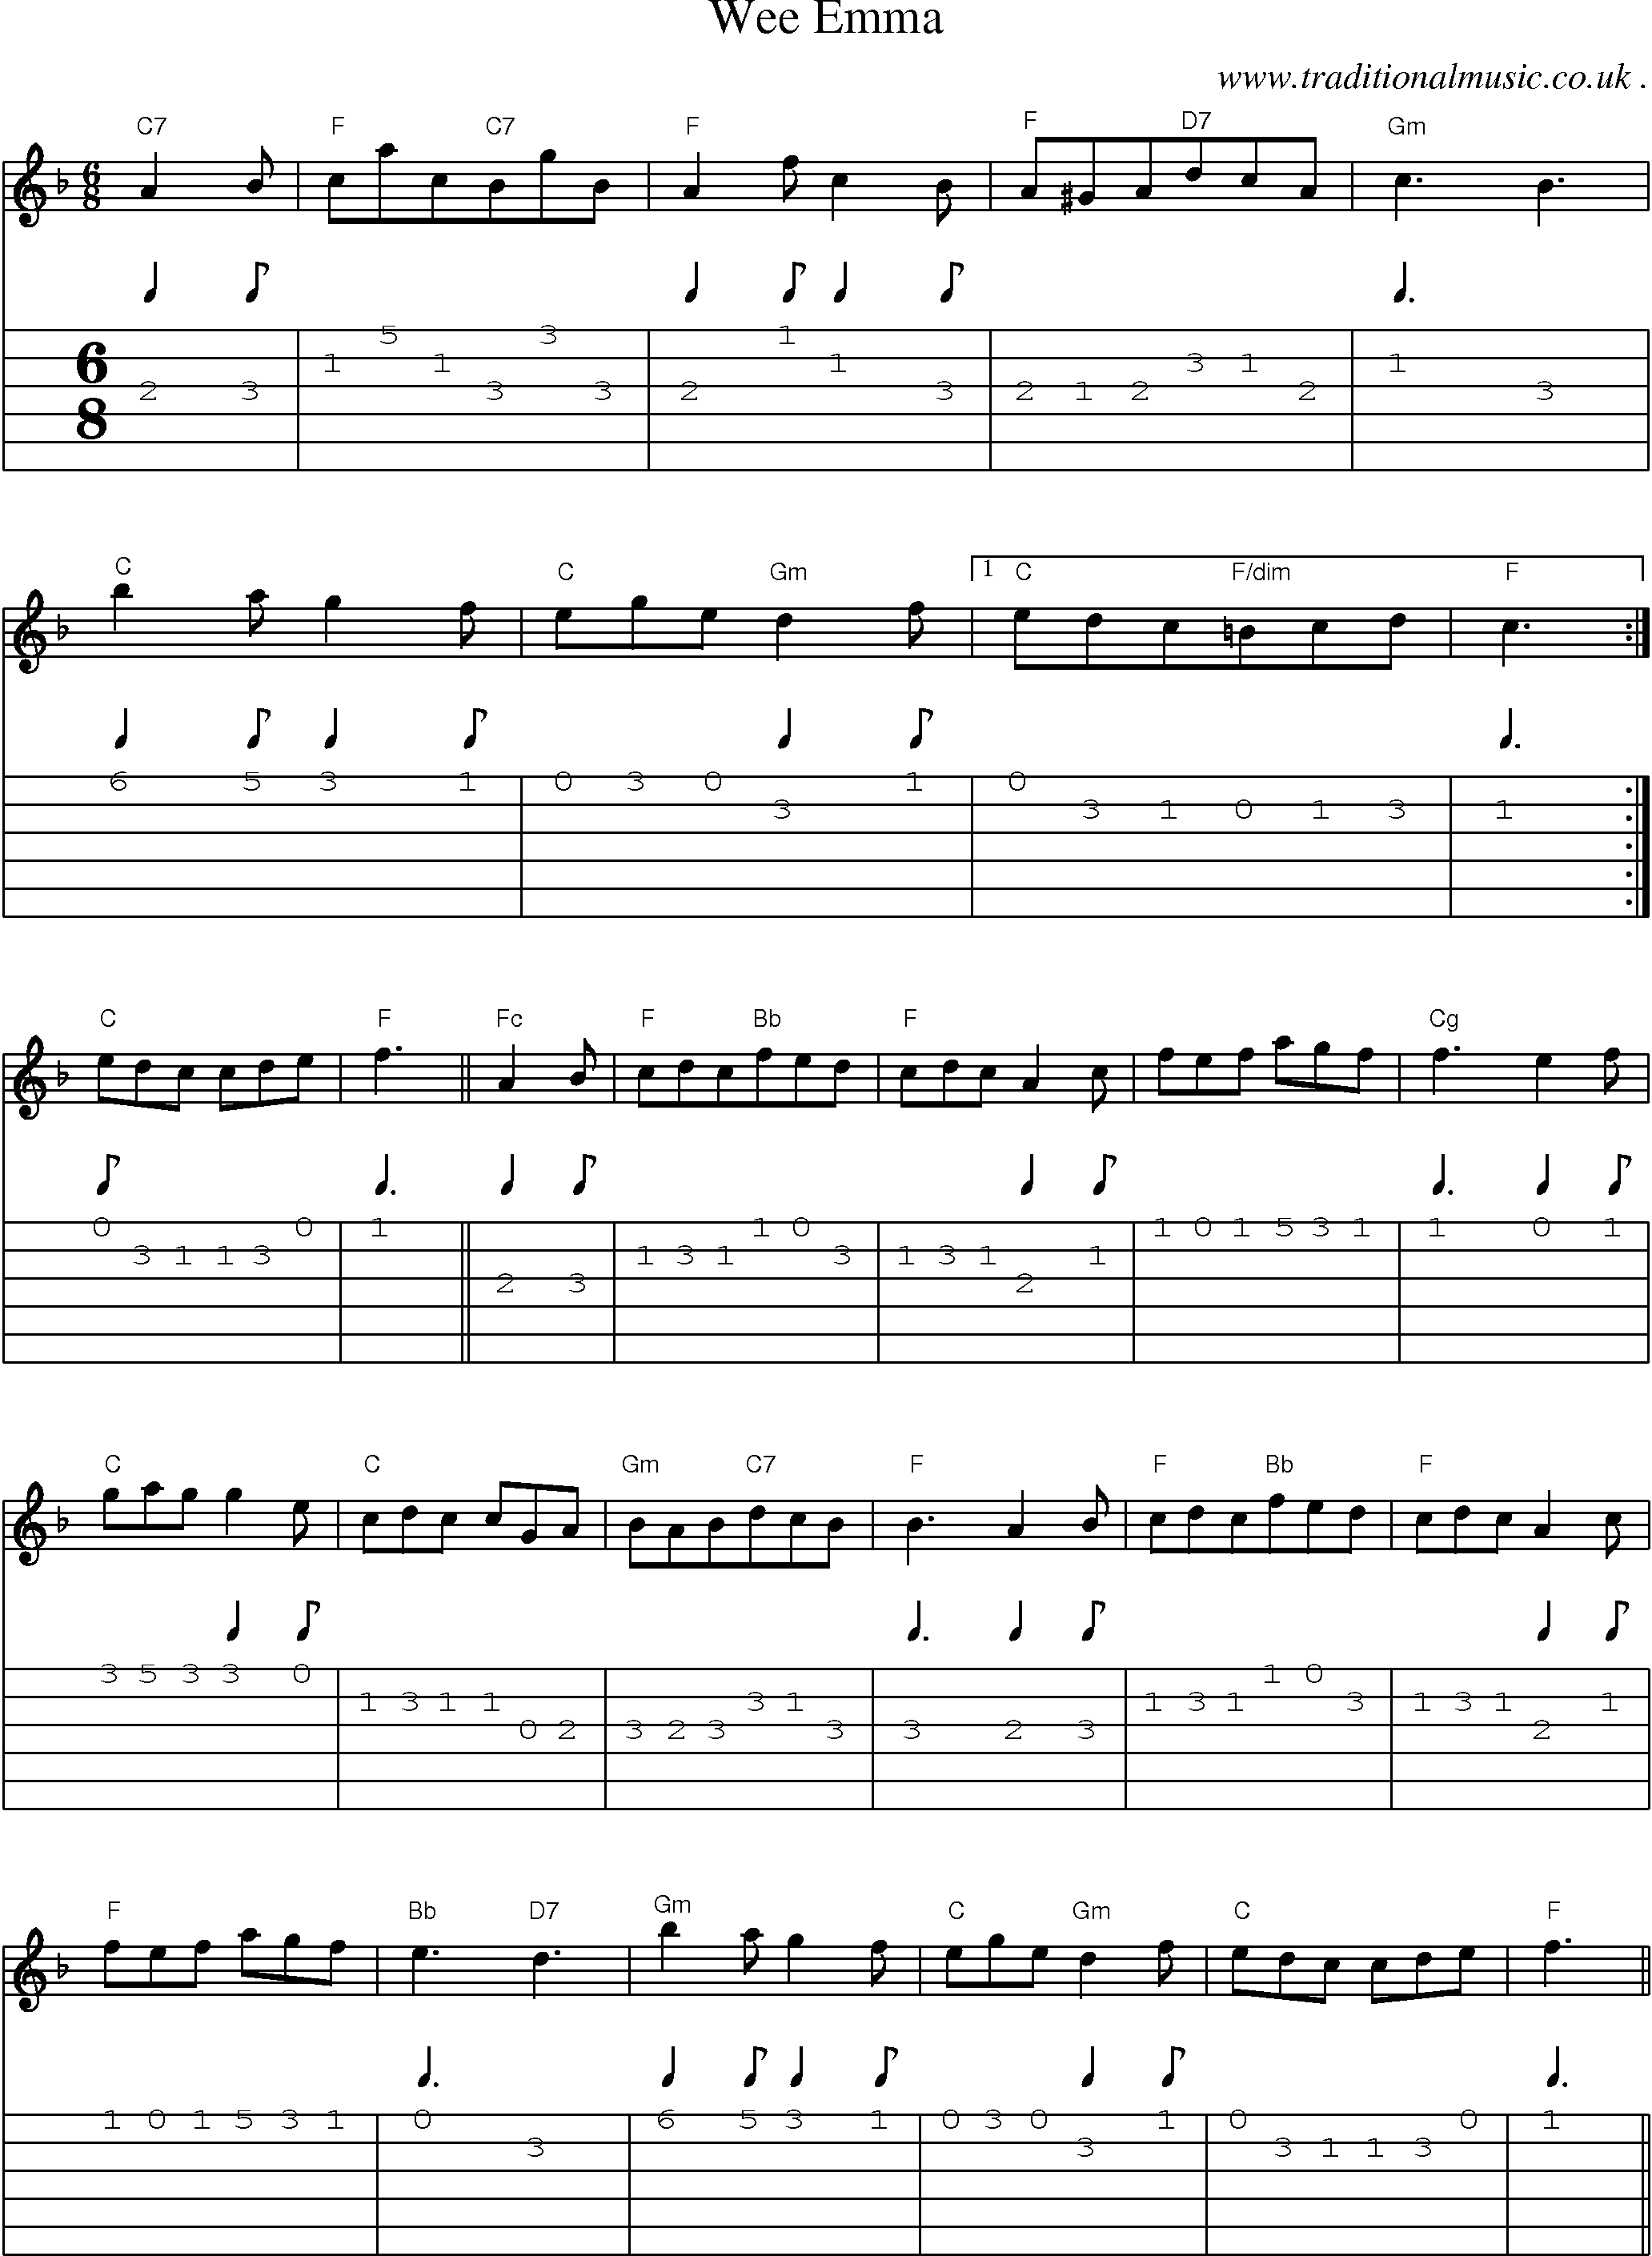 Sheet-Music and Guitar Tabs for Wee Emma